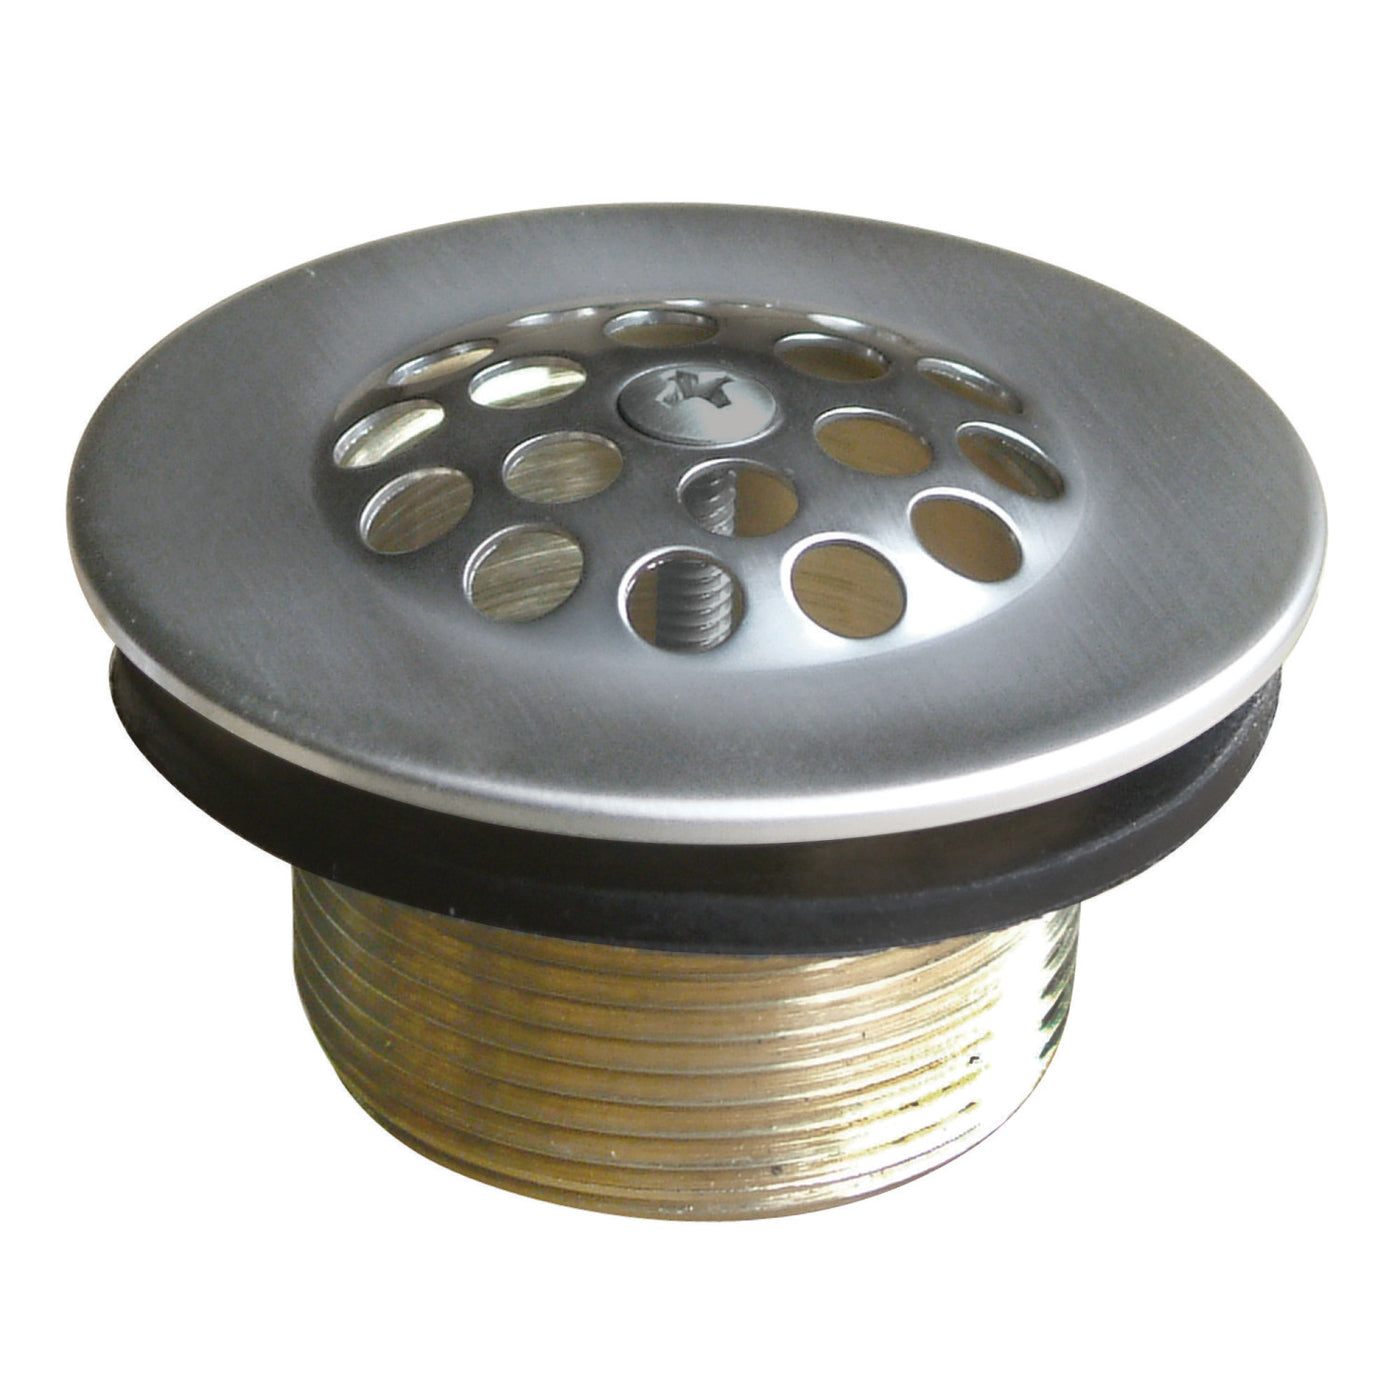 Elements of Design EDTL208 Bathtub Strainer Drain with Rubber, Brushed Nickel